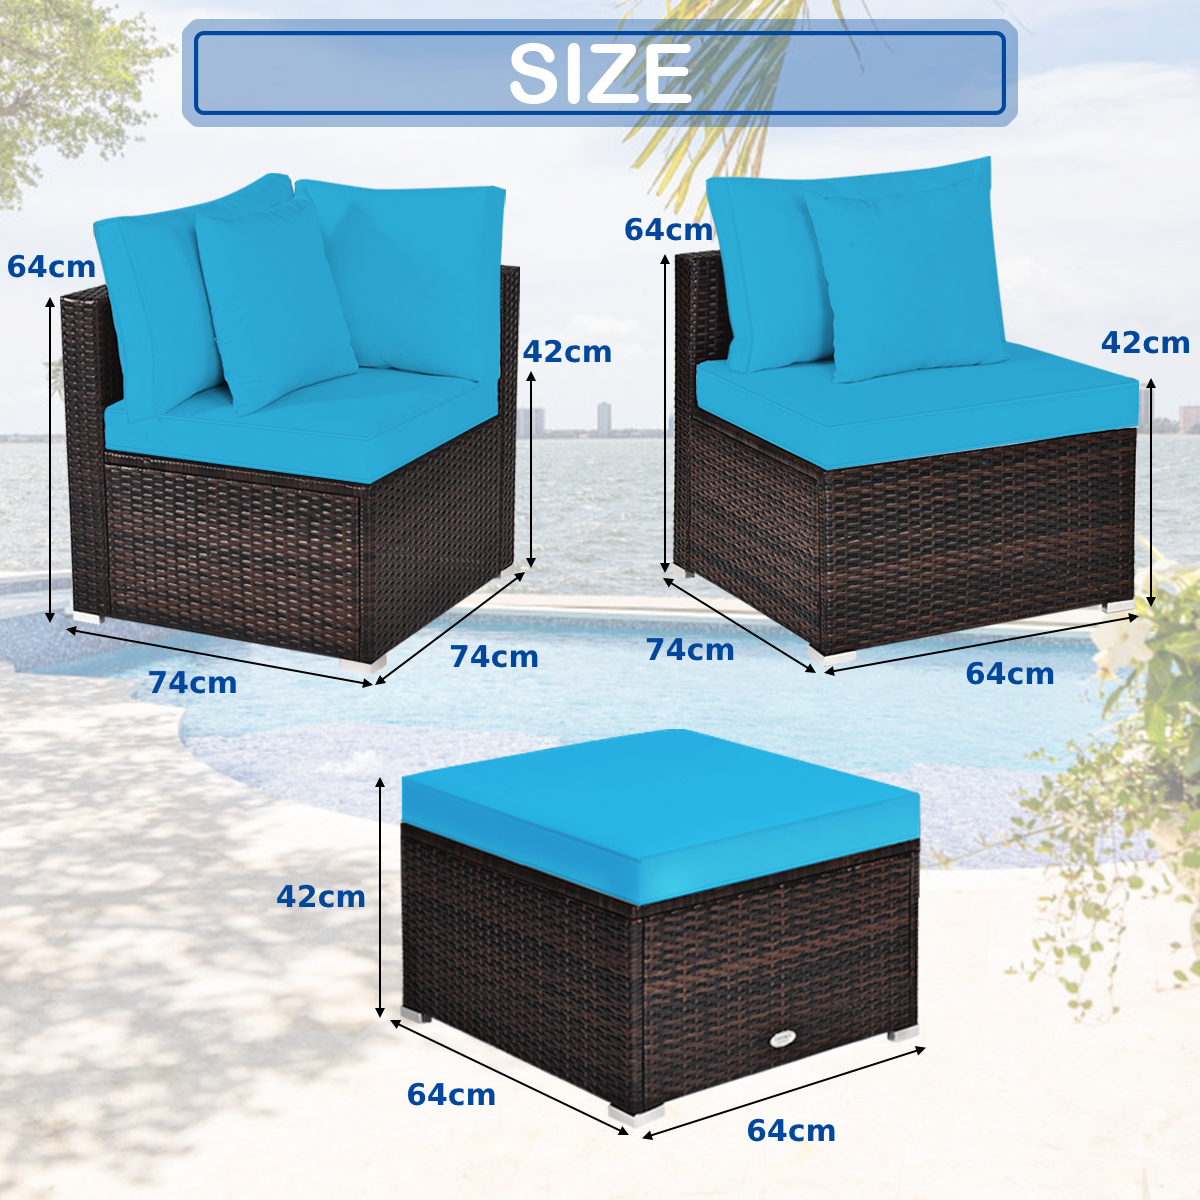 Turquoise_4_PCS_Patio_Rattan_Conversation_Set_with_Coffee_Table_Size-4.jpg